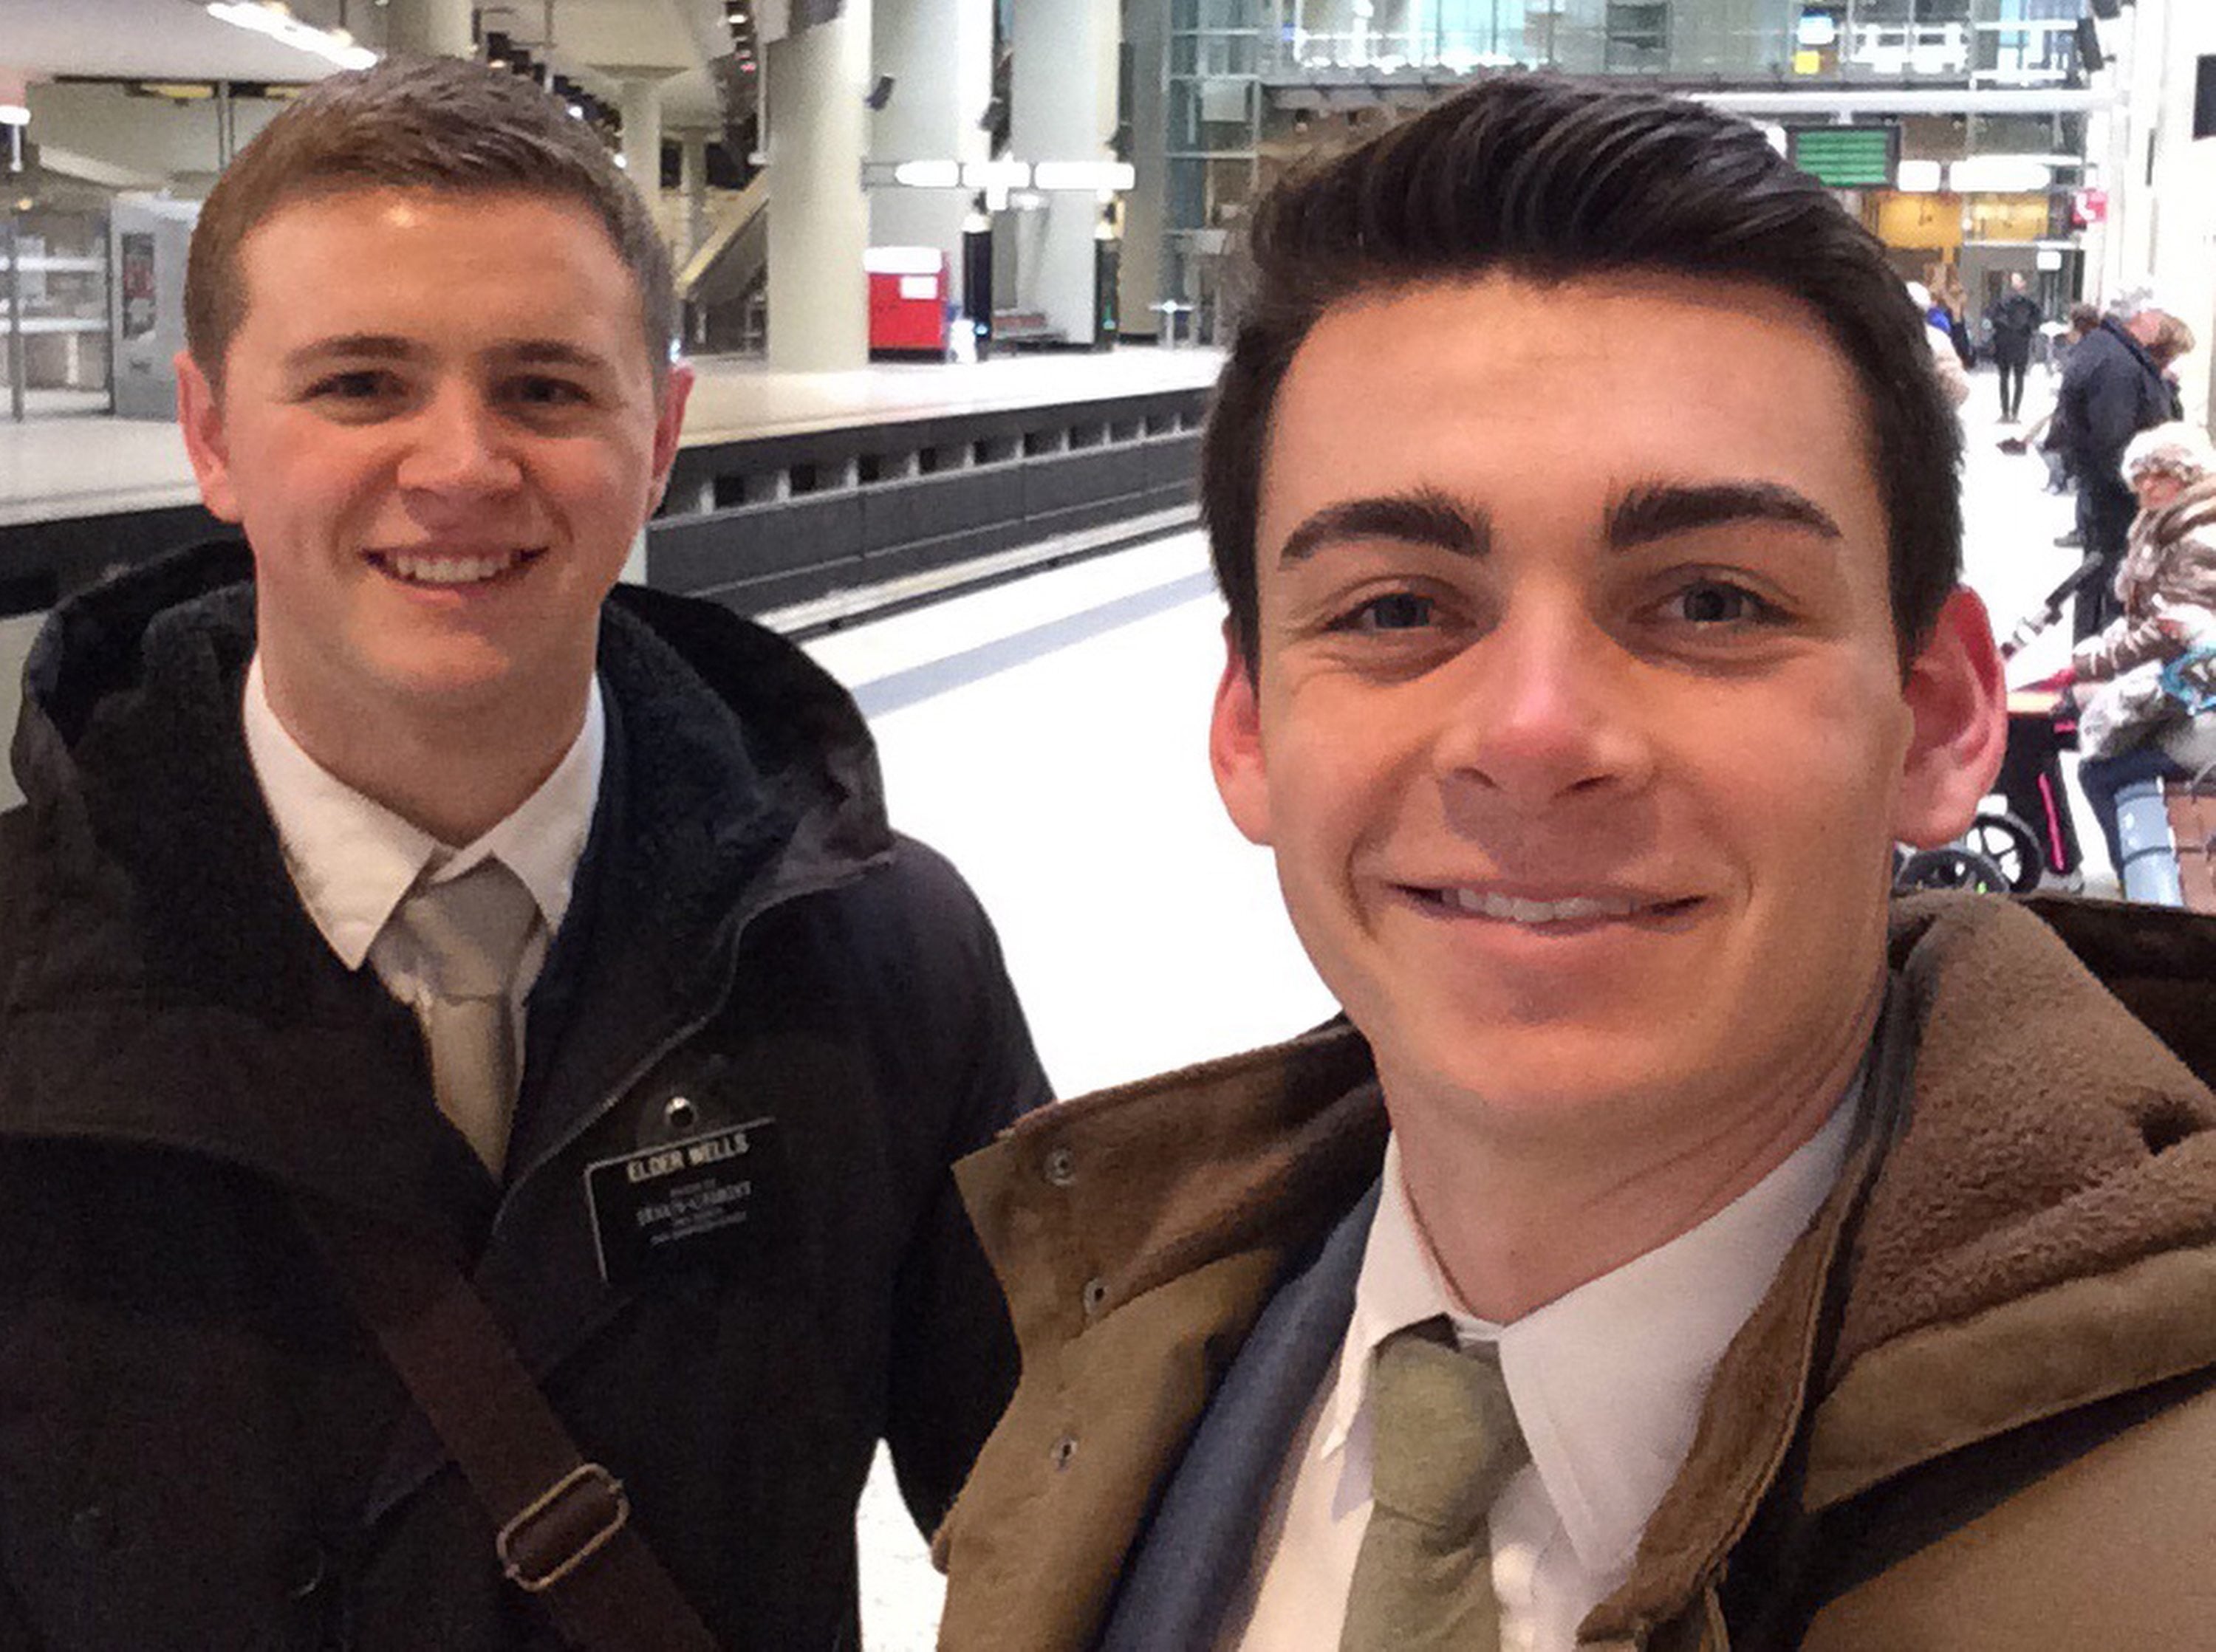 Mormon missionaries Mason Wells, 19, left, and Joseph Empey, 20, both Utahns, were injured in Tuesday&#039;s explosion at the Brussels airport.